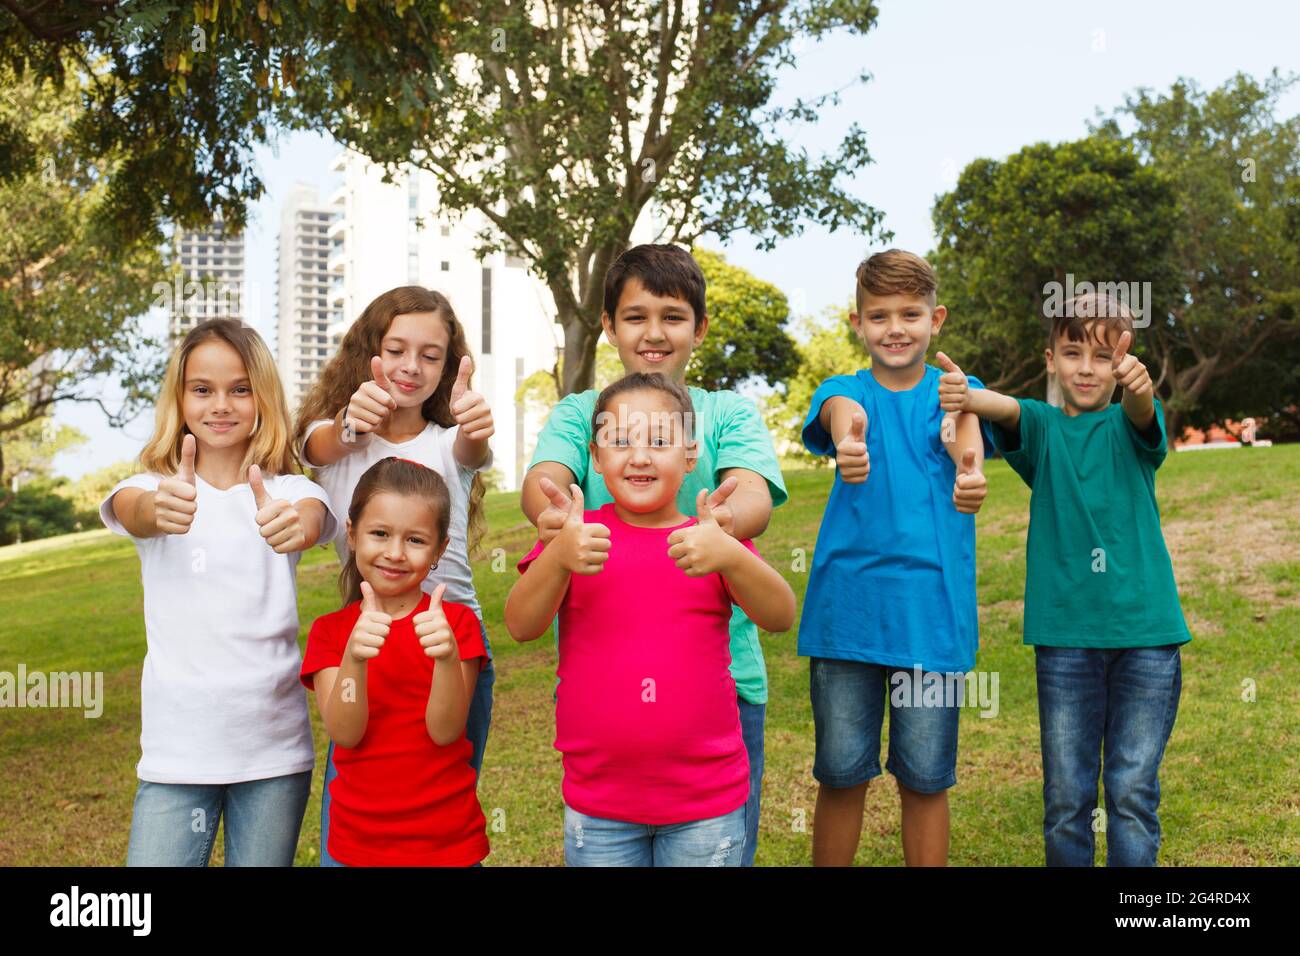 Group of happy children showing thumbs up Stock Photo